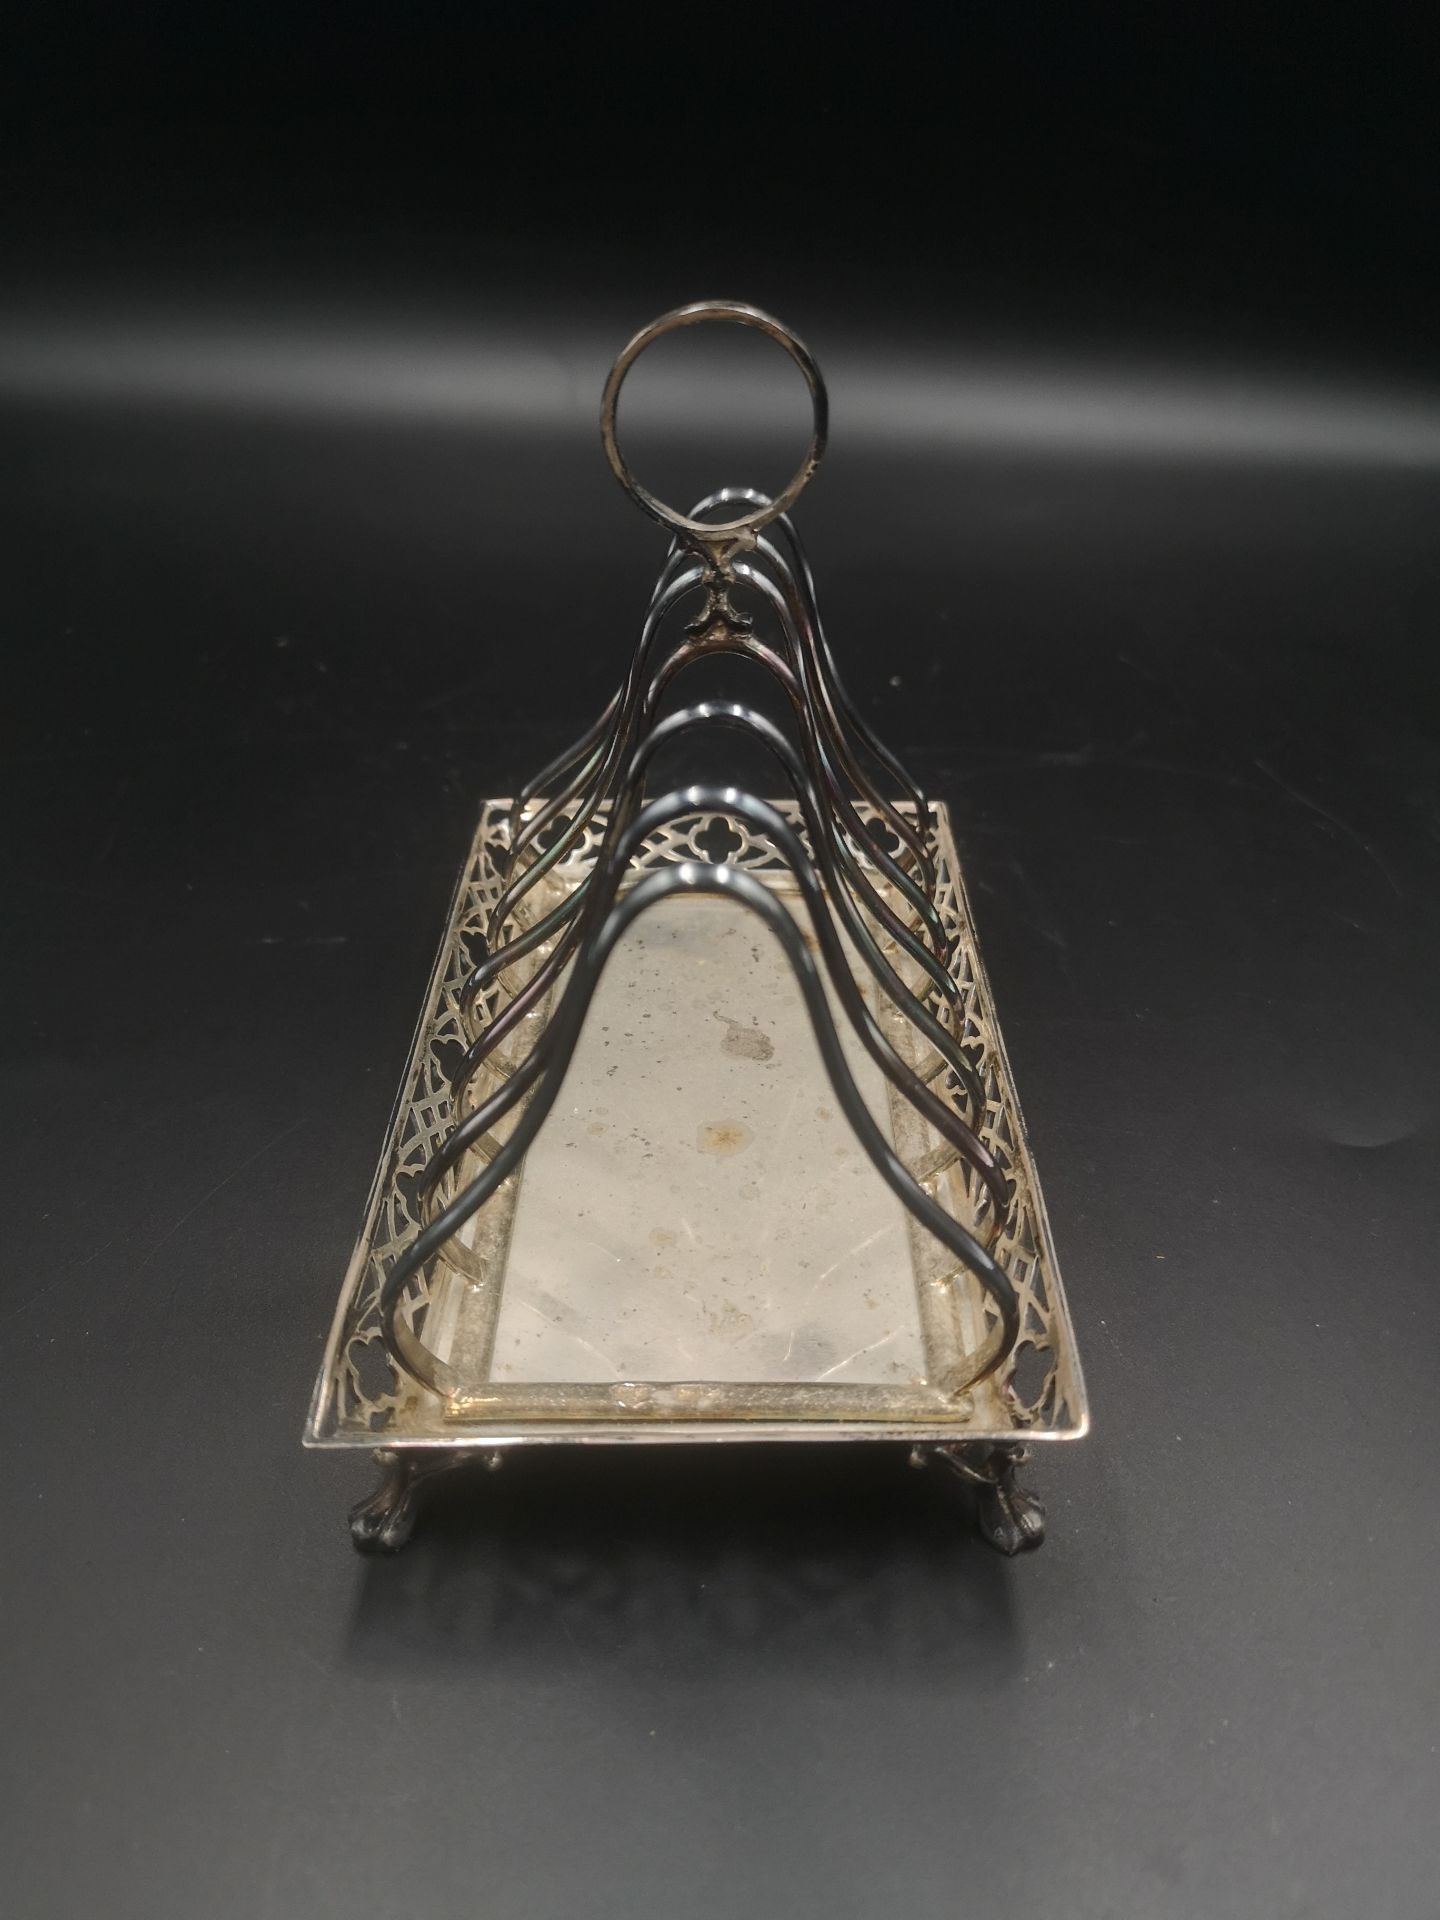 Goldsmith and Silversmith Co. silver toast rack, 1911 - Image 5 of 5